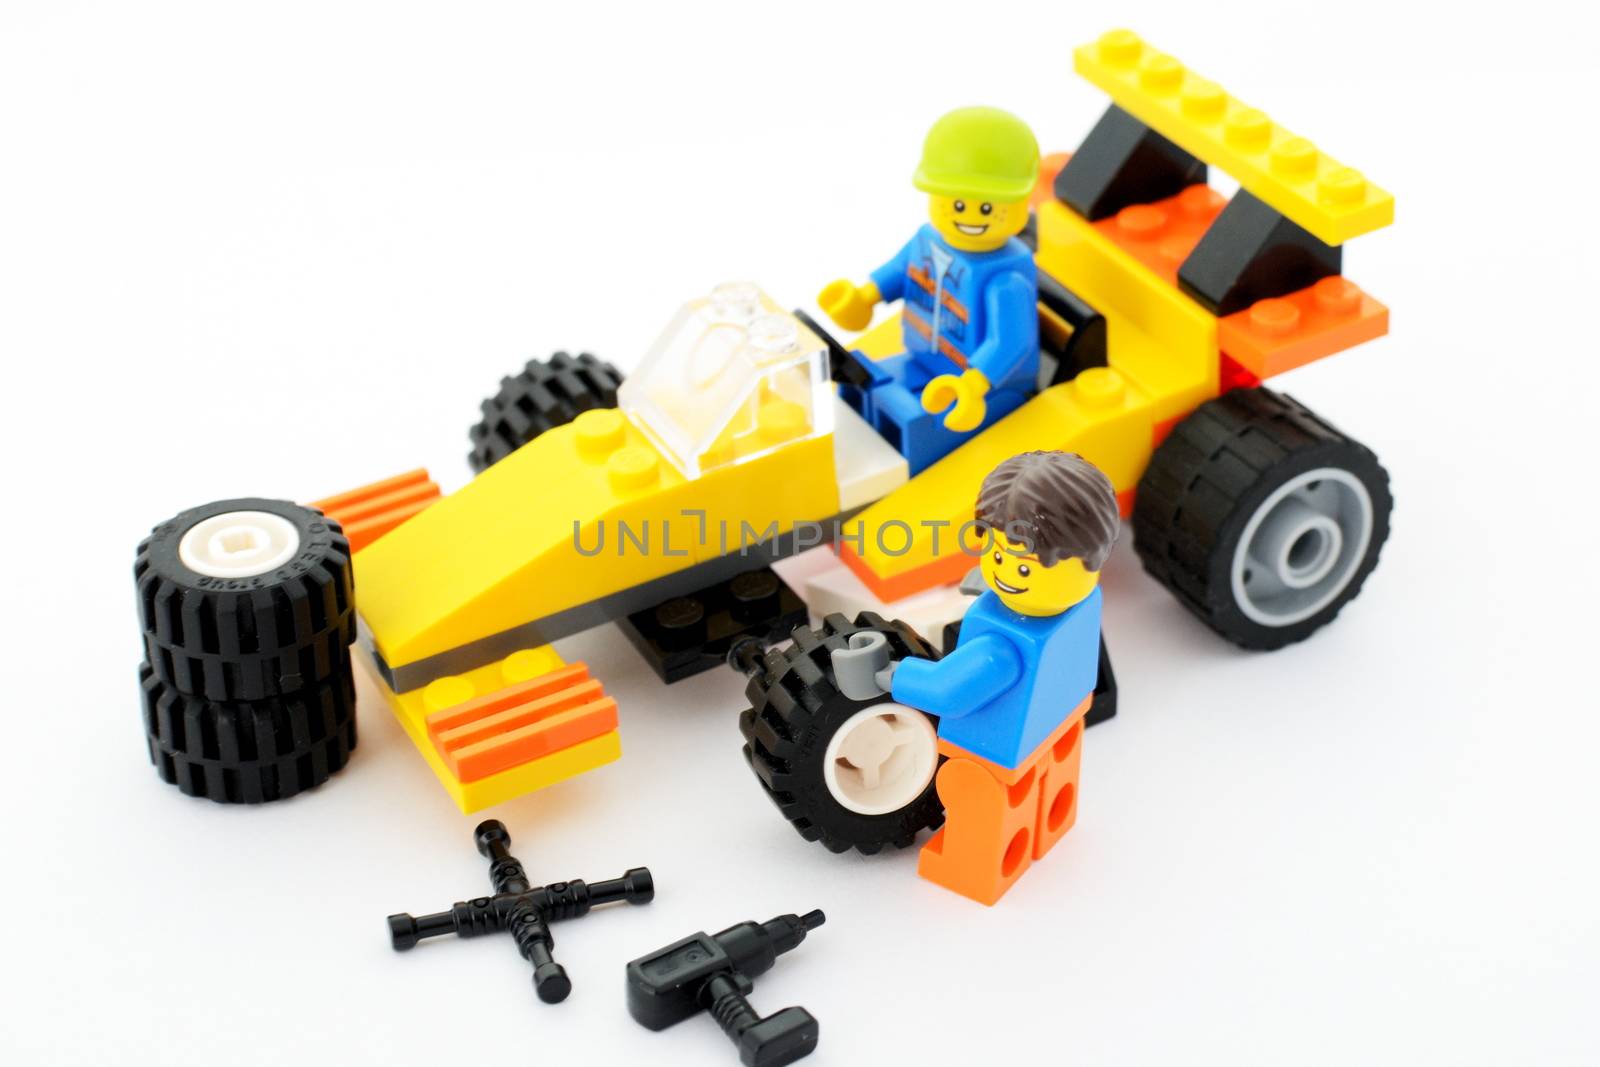 WROCLAW, POLAND - FEBRUARY 28: Formula driver waits while mechanic changes tires in Lego sports car on 28th February in Wroclaw, Poland.